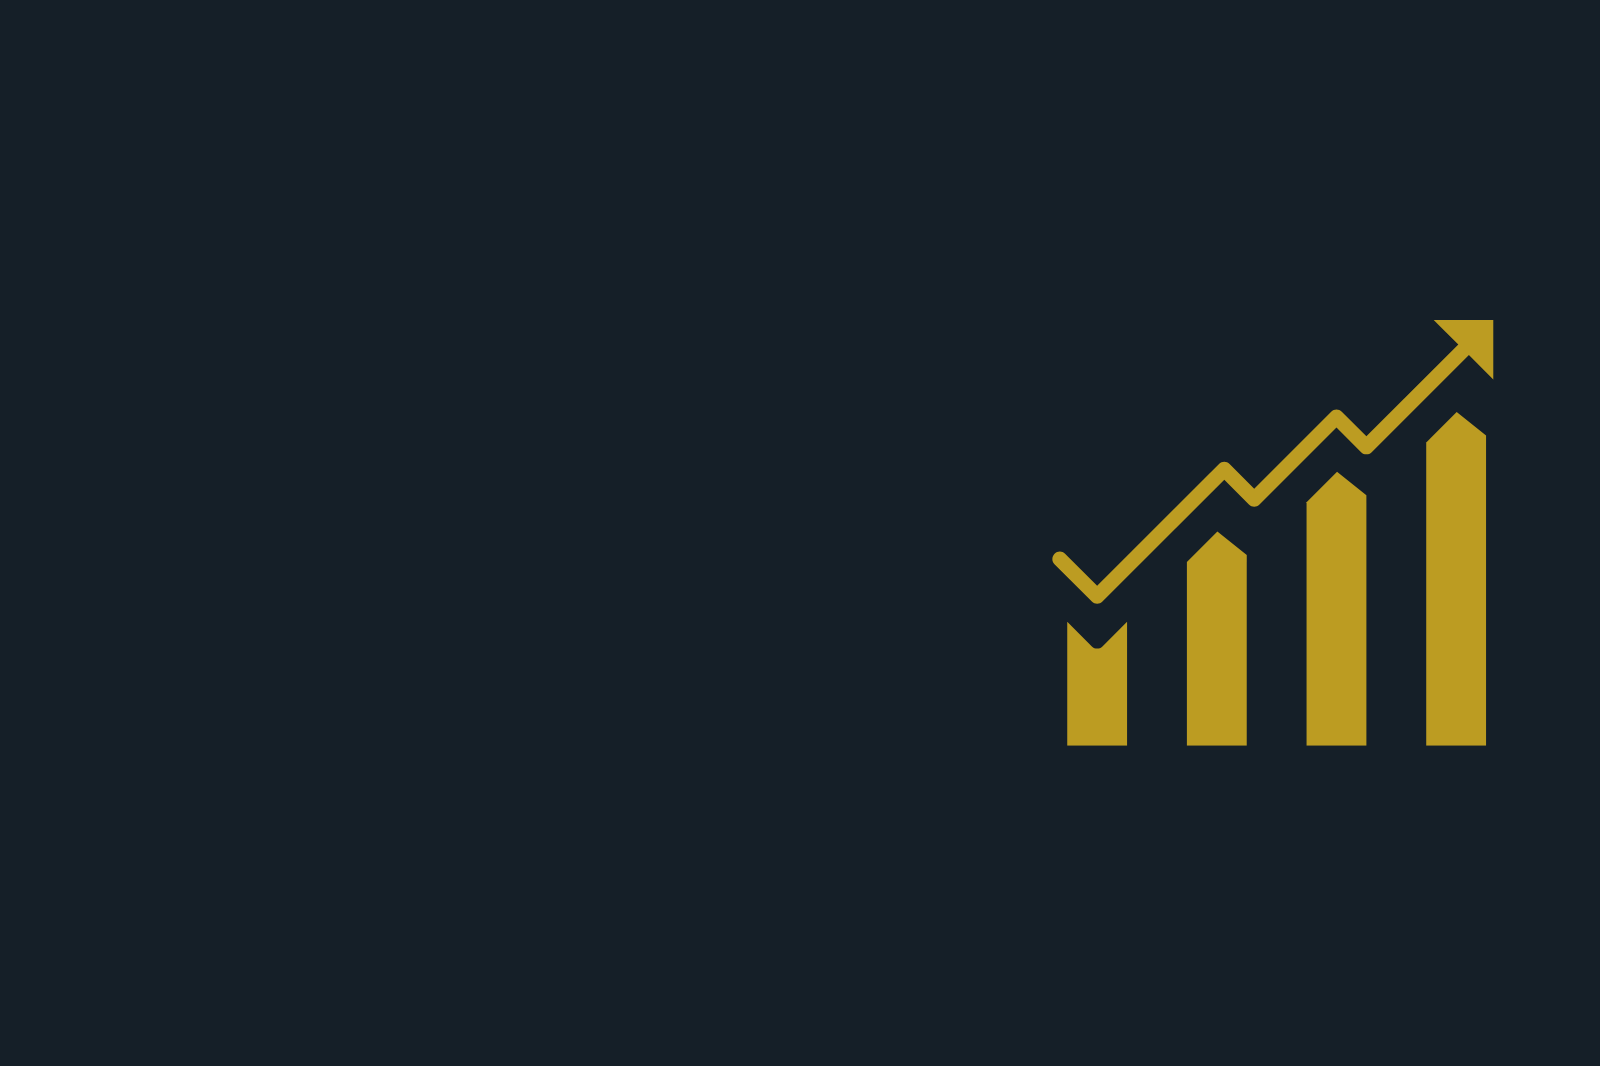 A golden arrow pointing up on a black background, symbolizing improved performance.